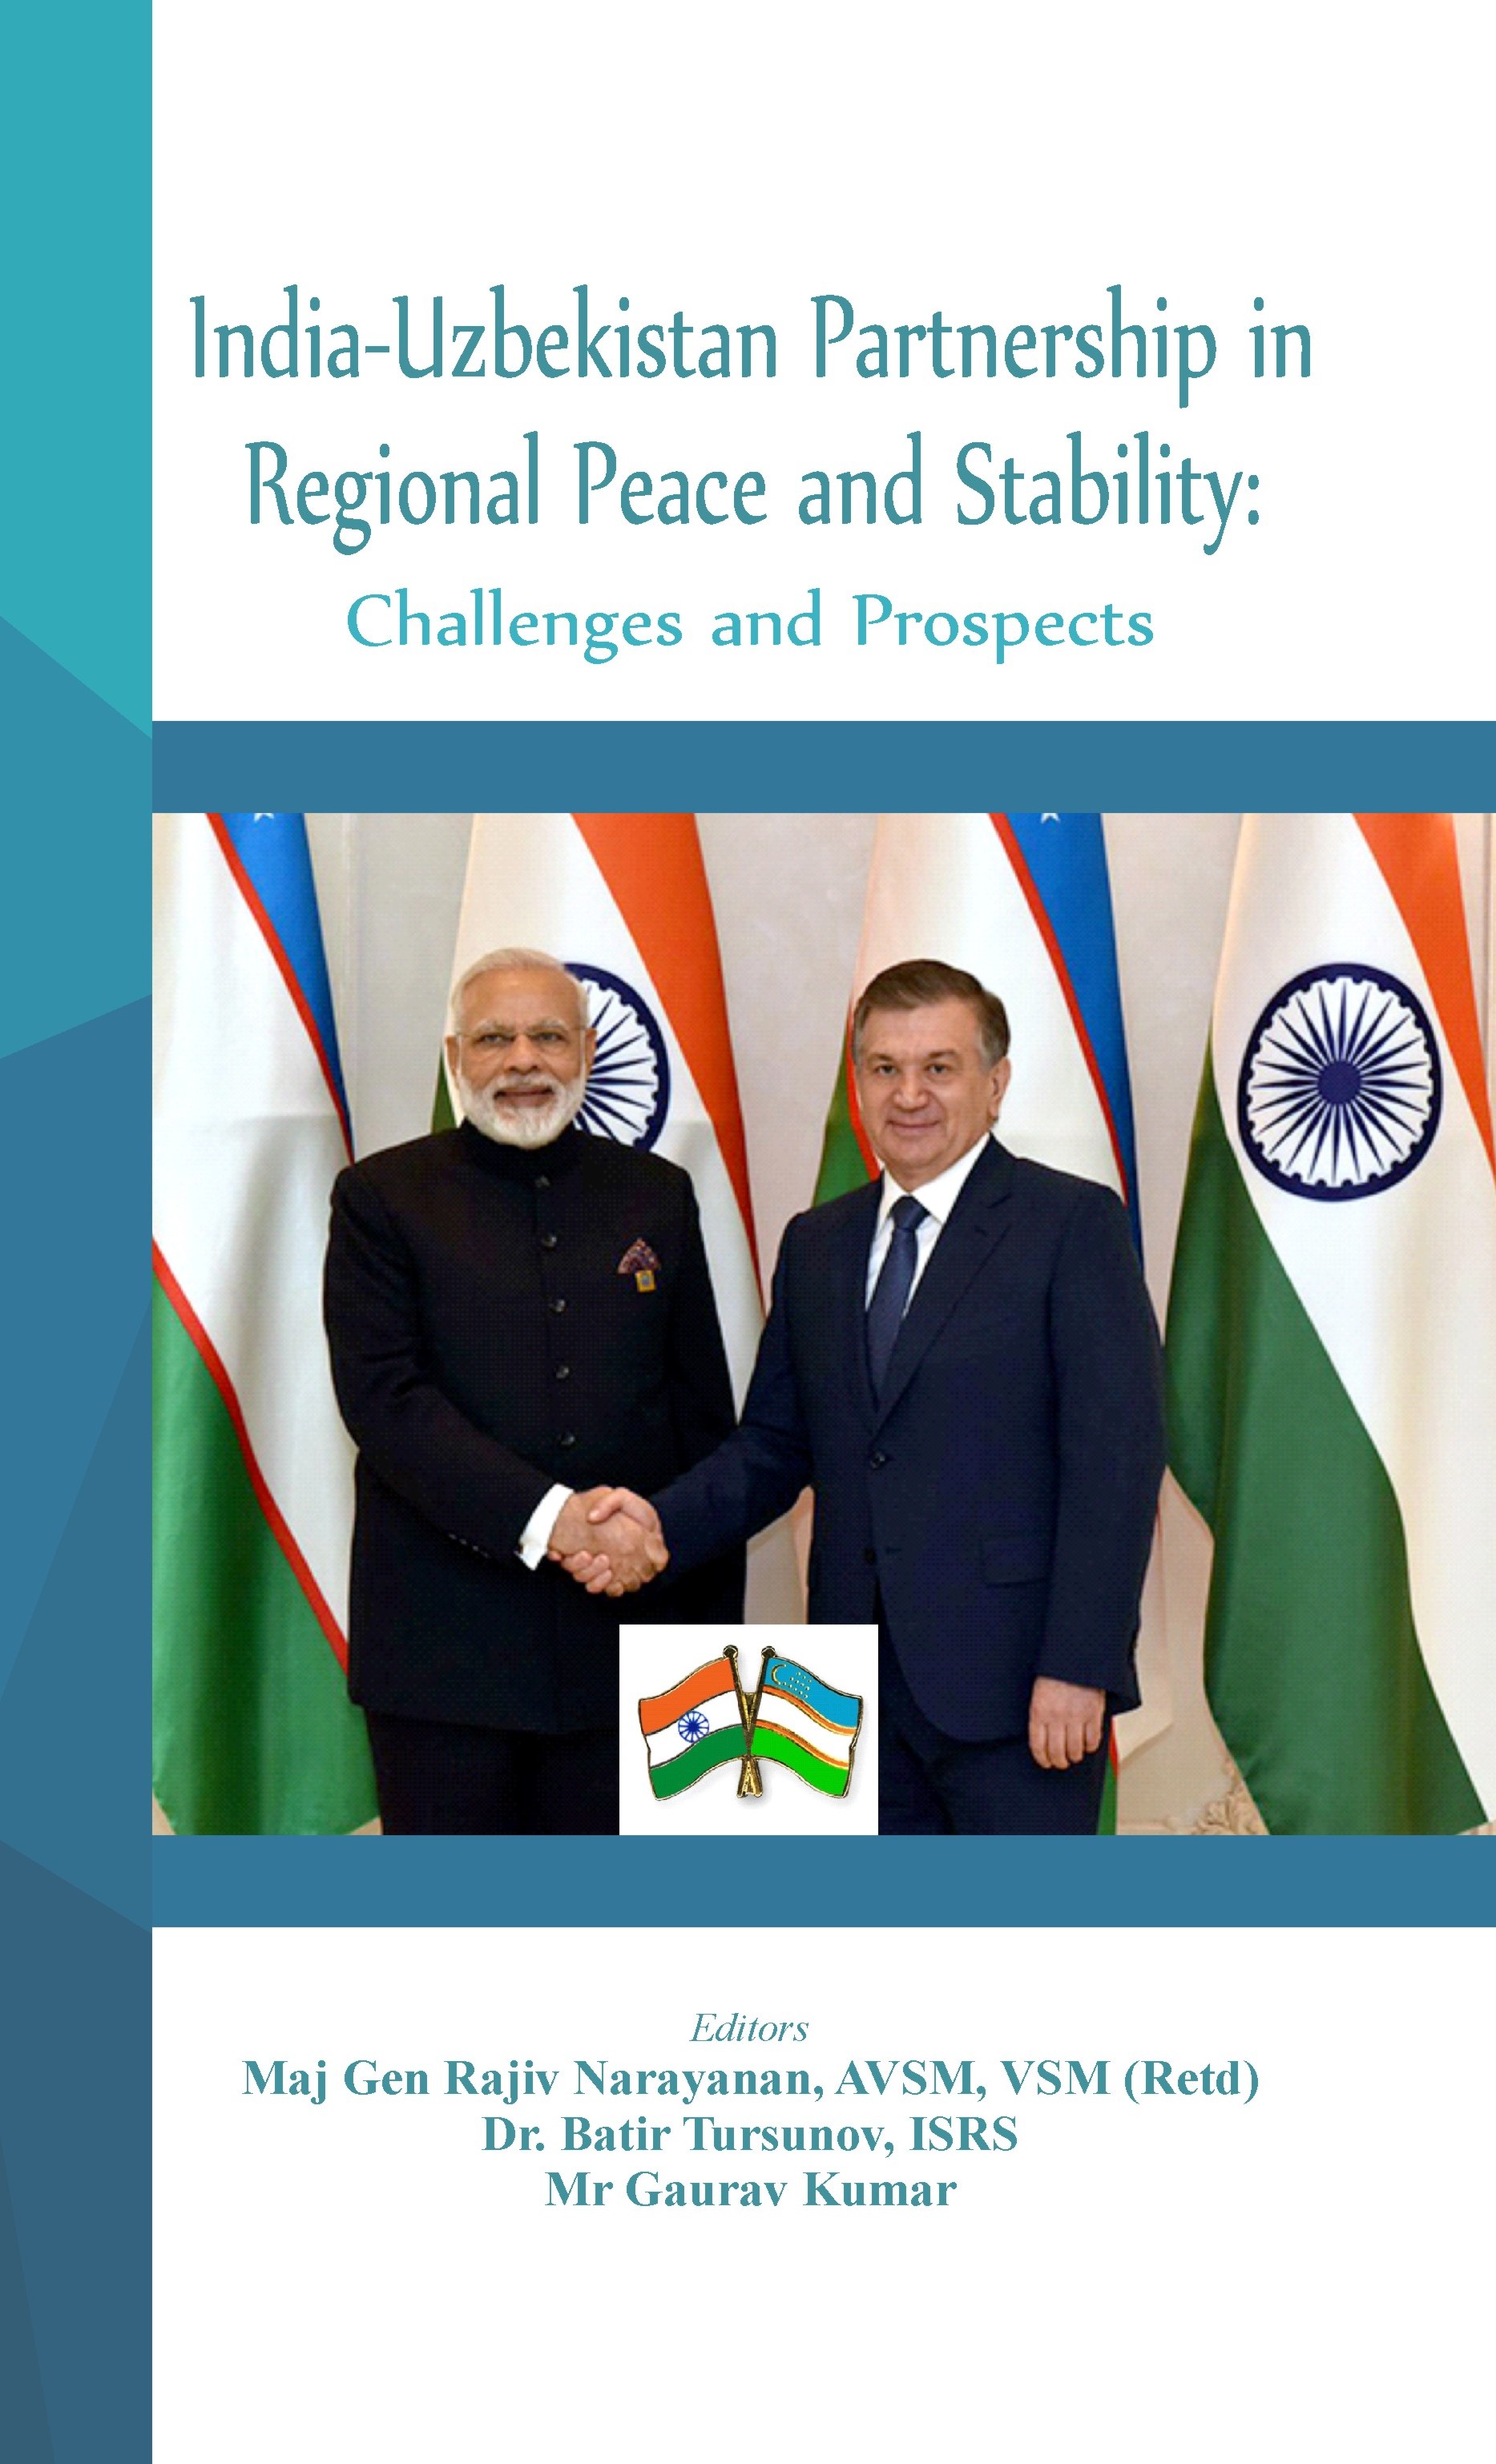 India - Uzbekistan Partnership in Regional Peace and Stability : Challenges and Prospects